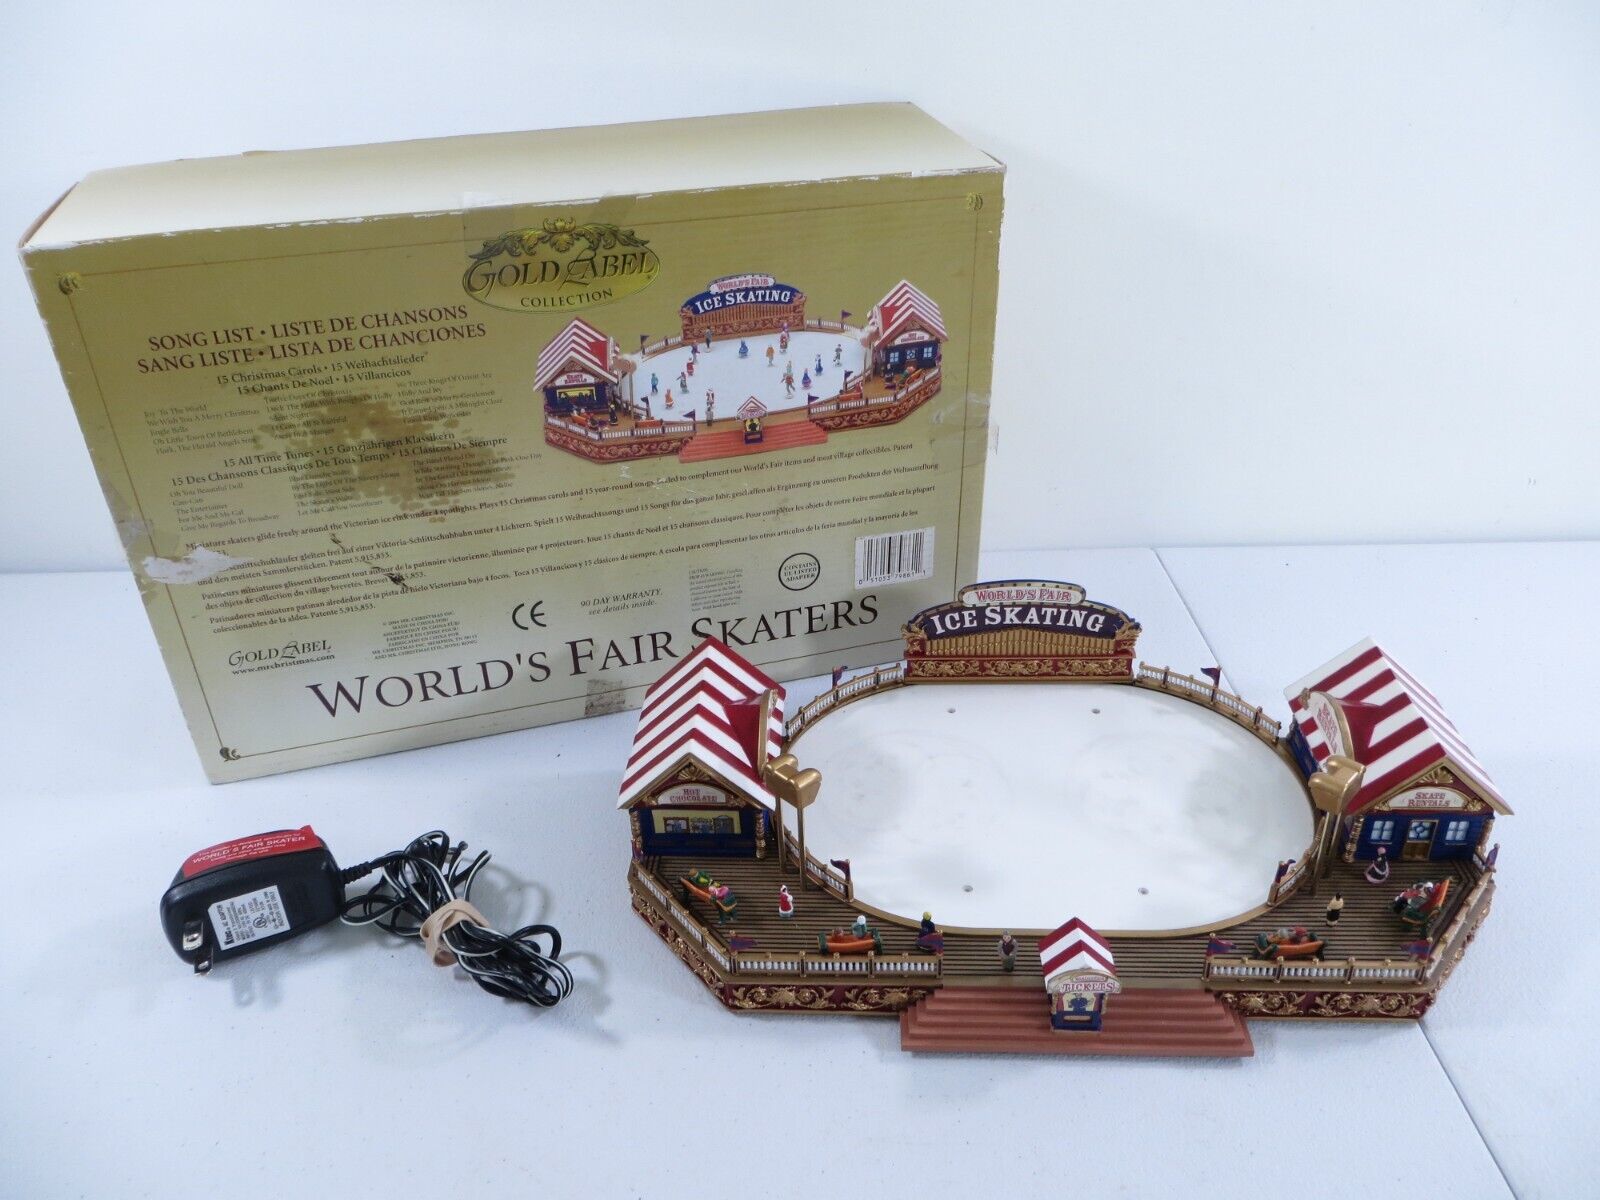 Mr Christmas Gold Label Collection Worlds Fair Skaters 2004 NO SKATERS BASE ONLY